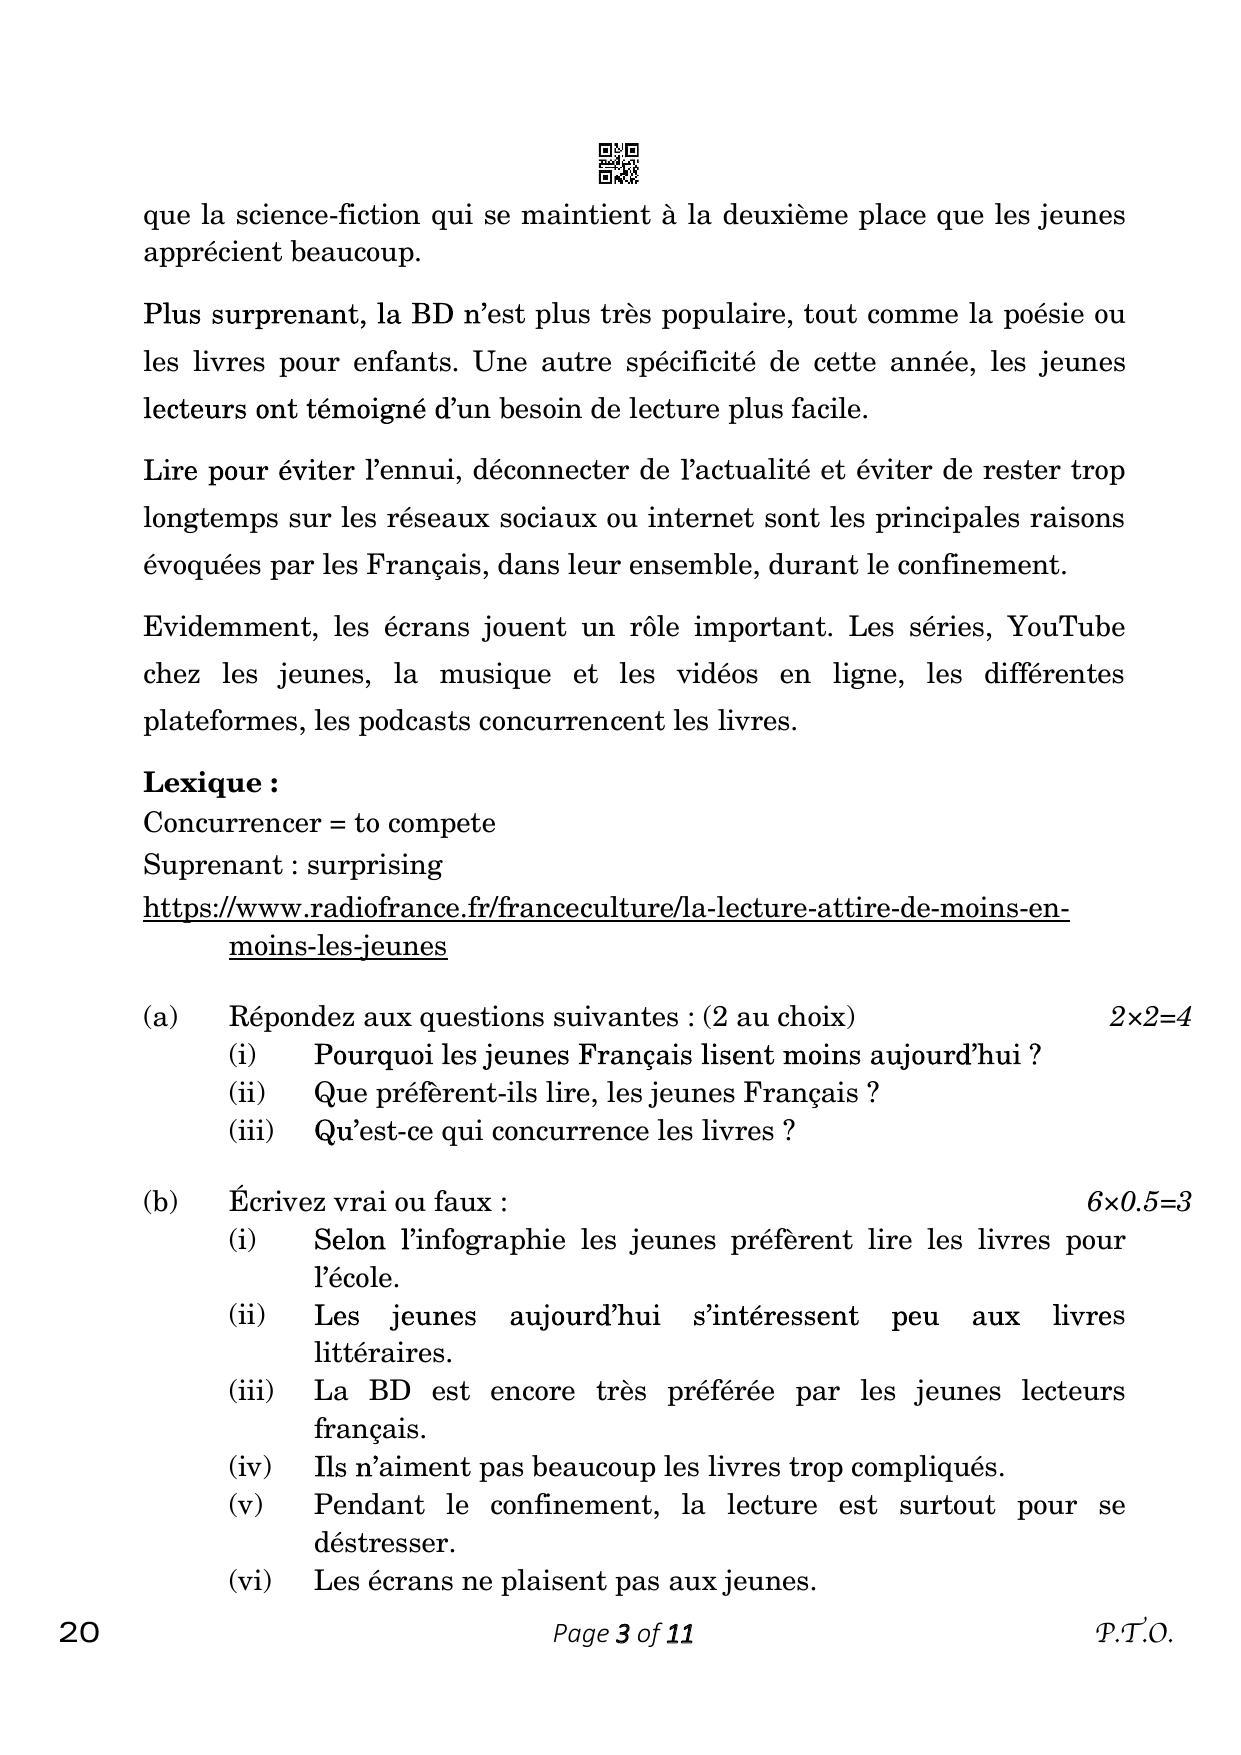 CBSE Class 10 French (Compartment) 2023 Question Paper - Page 3